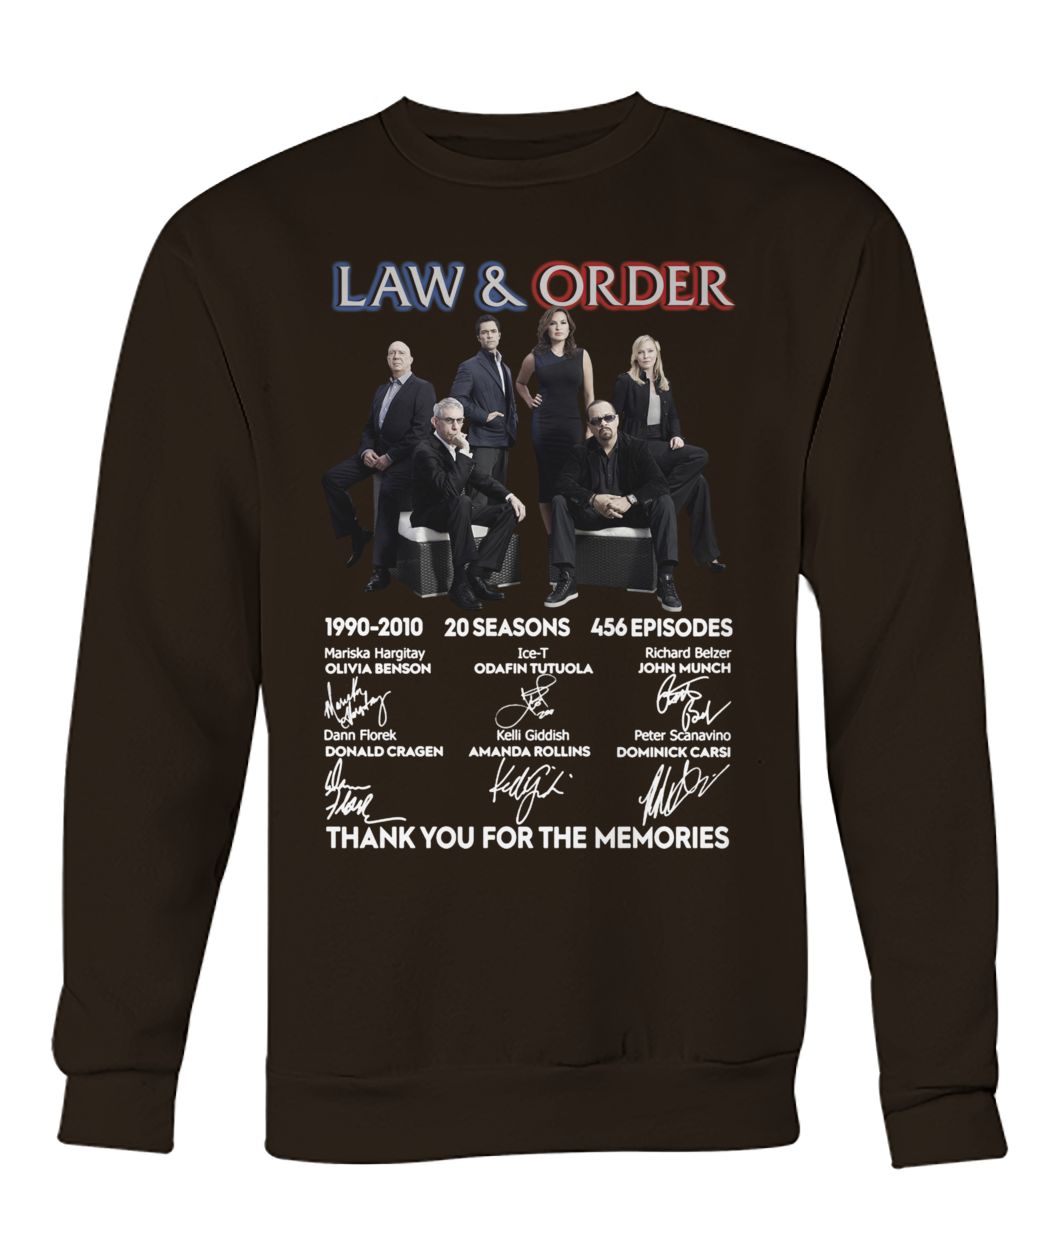 Law and order tv show 1990 2010 20 seasons 456 episodes thank you for memories signatures crew neck sweatshirt